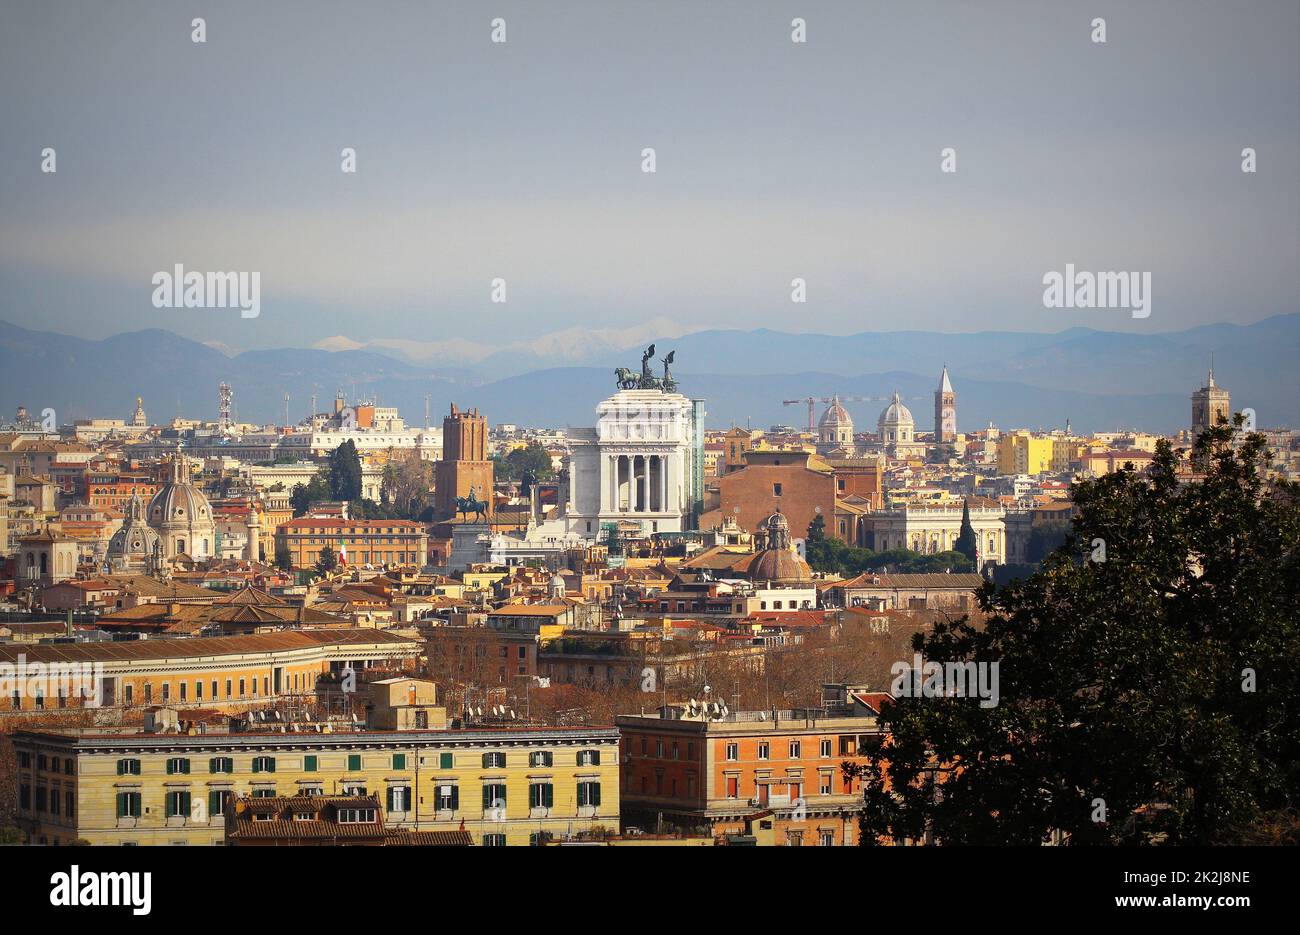 Panoramic view over the historic center of Rome, Italy from from Janiculum hill and terrace, with Vittoriano, TrinitÃ  dei Monti church and Quirinale palace. Stock Photo